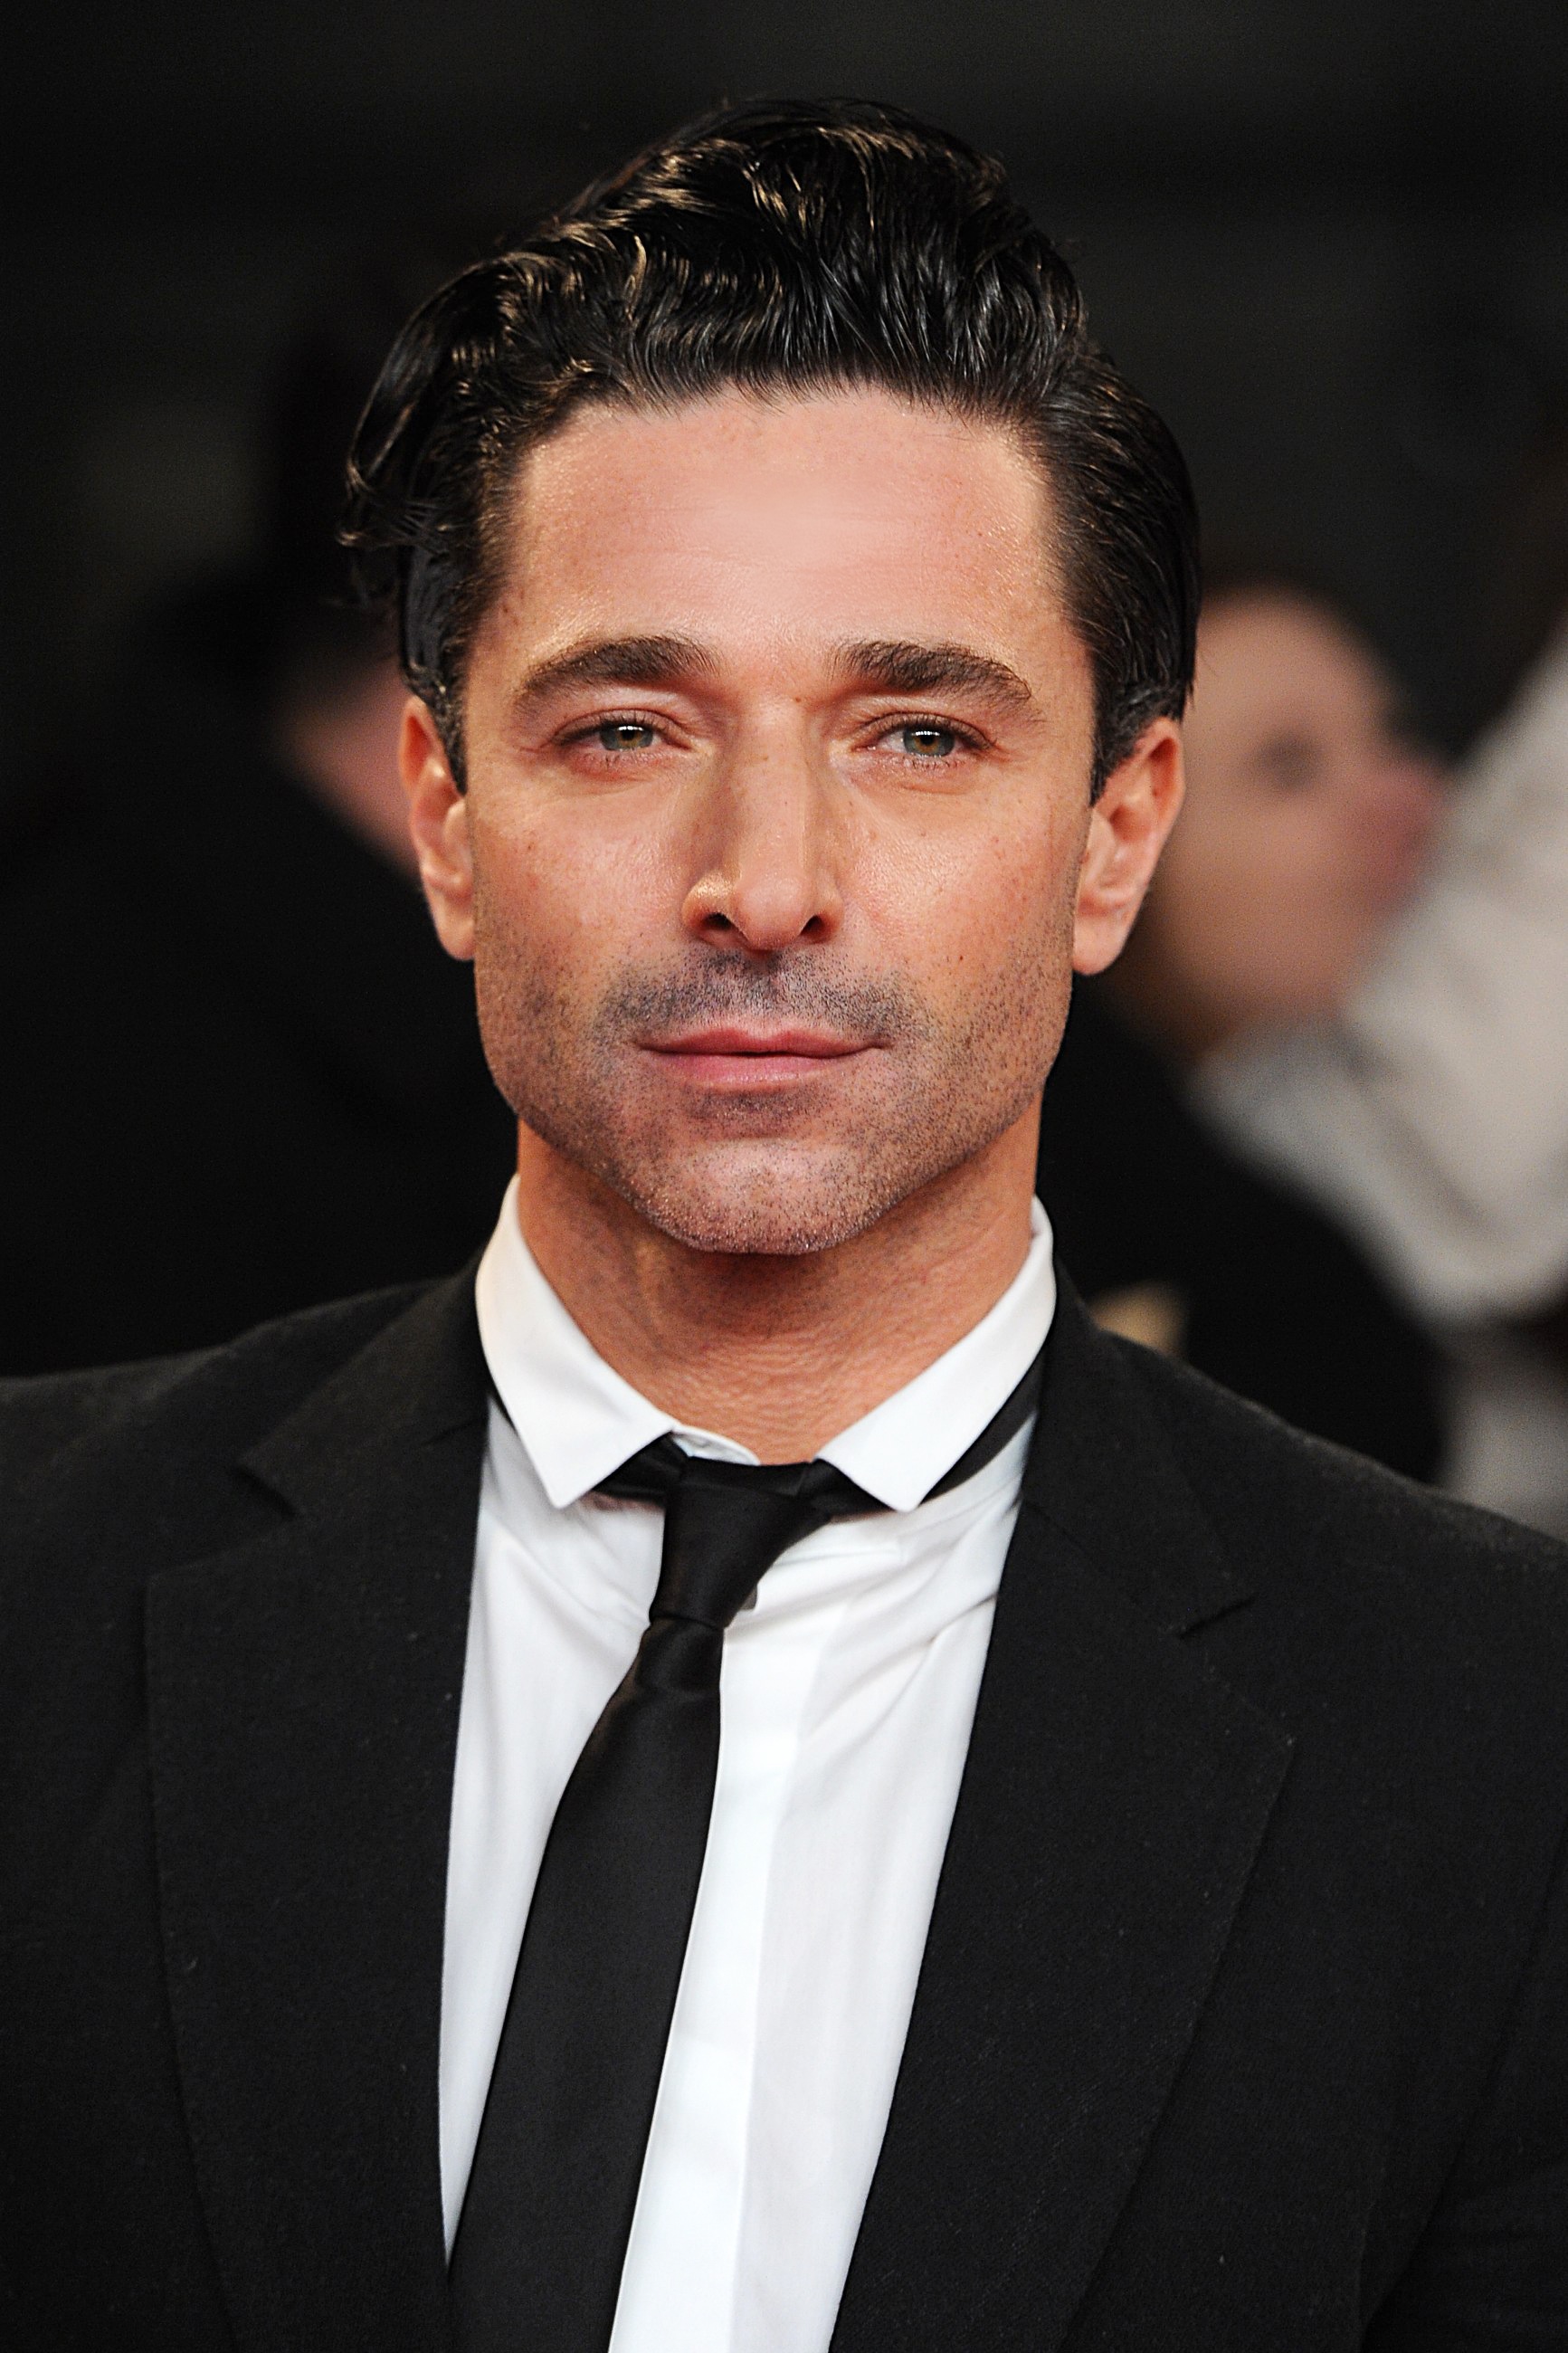 Jake Canuso arrival at the National Televison Awards 2012